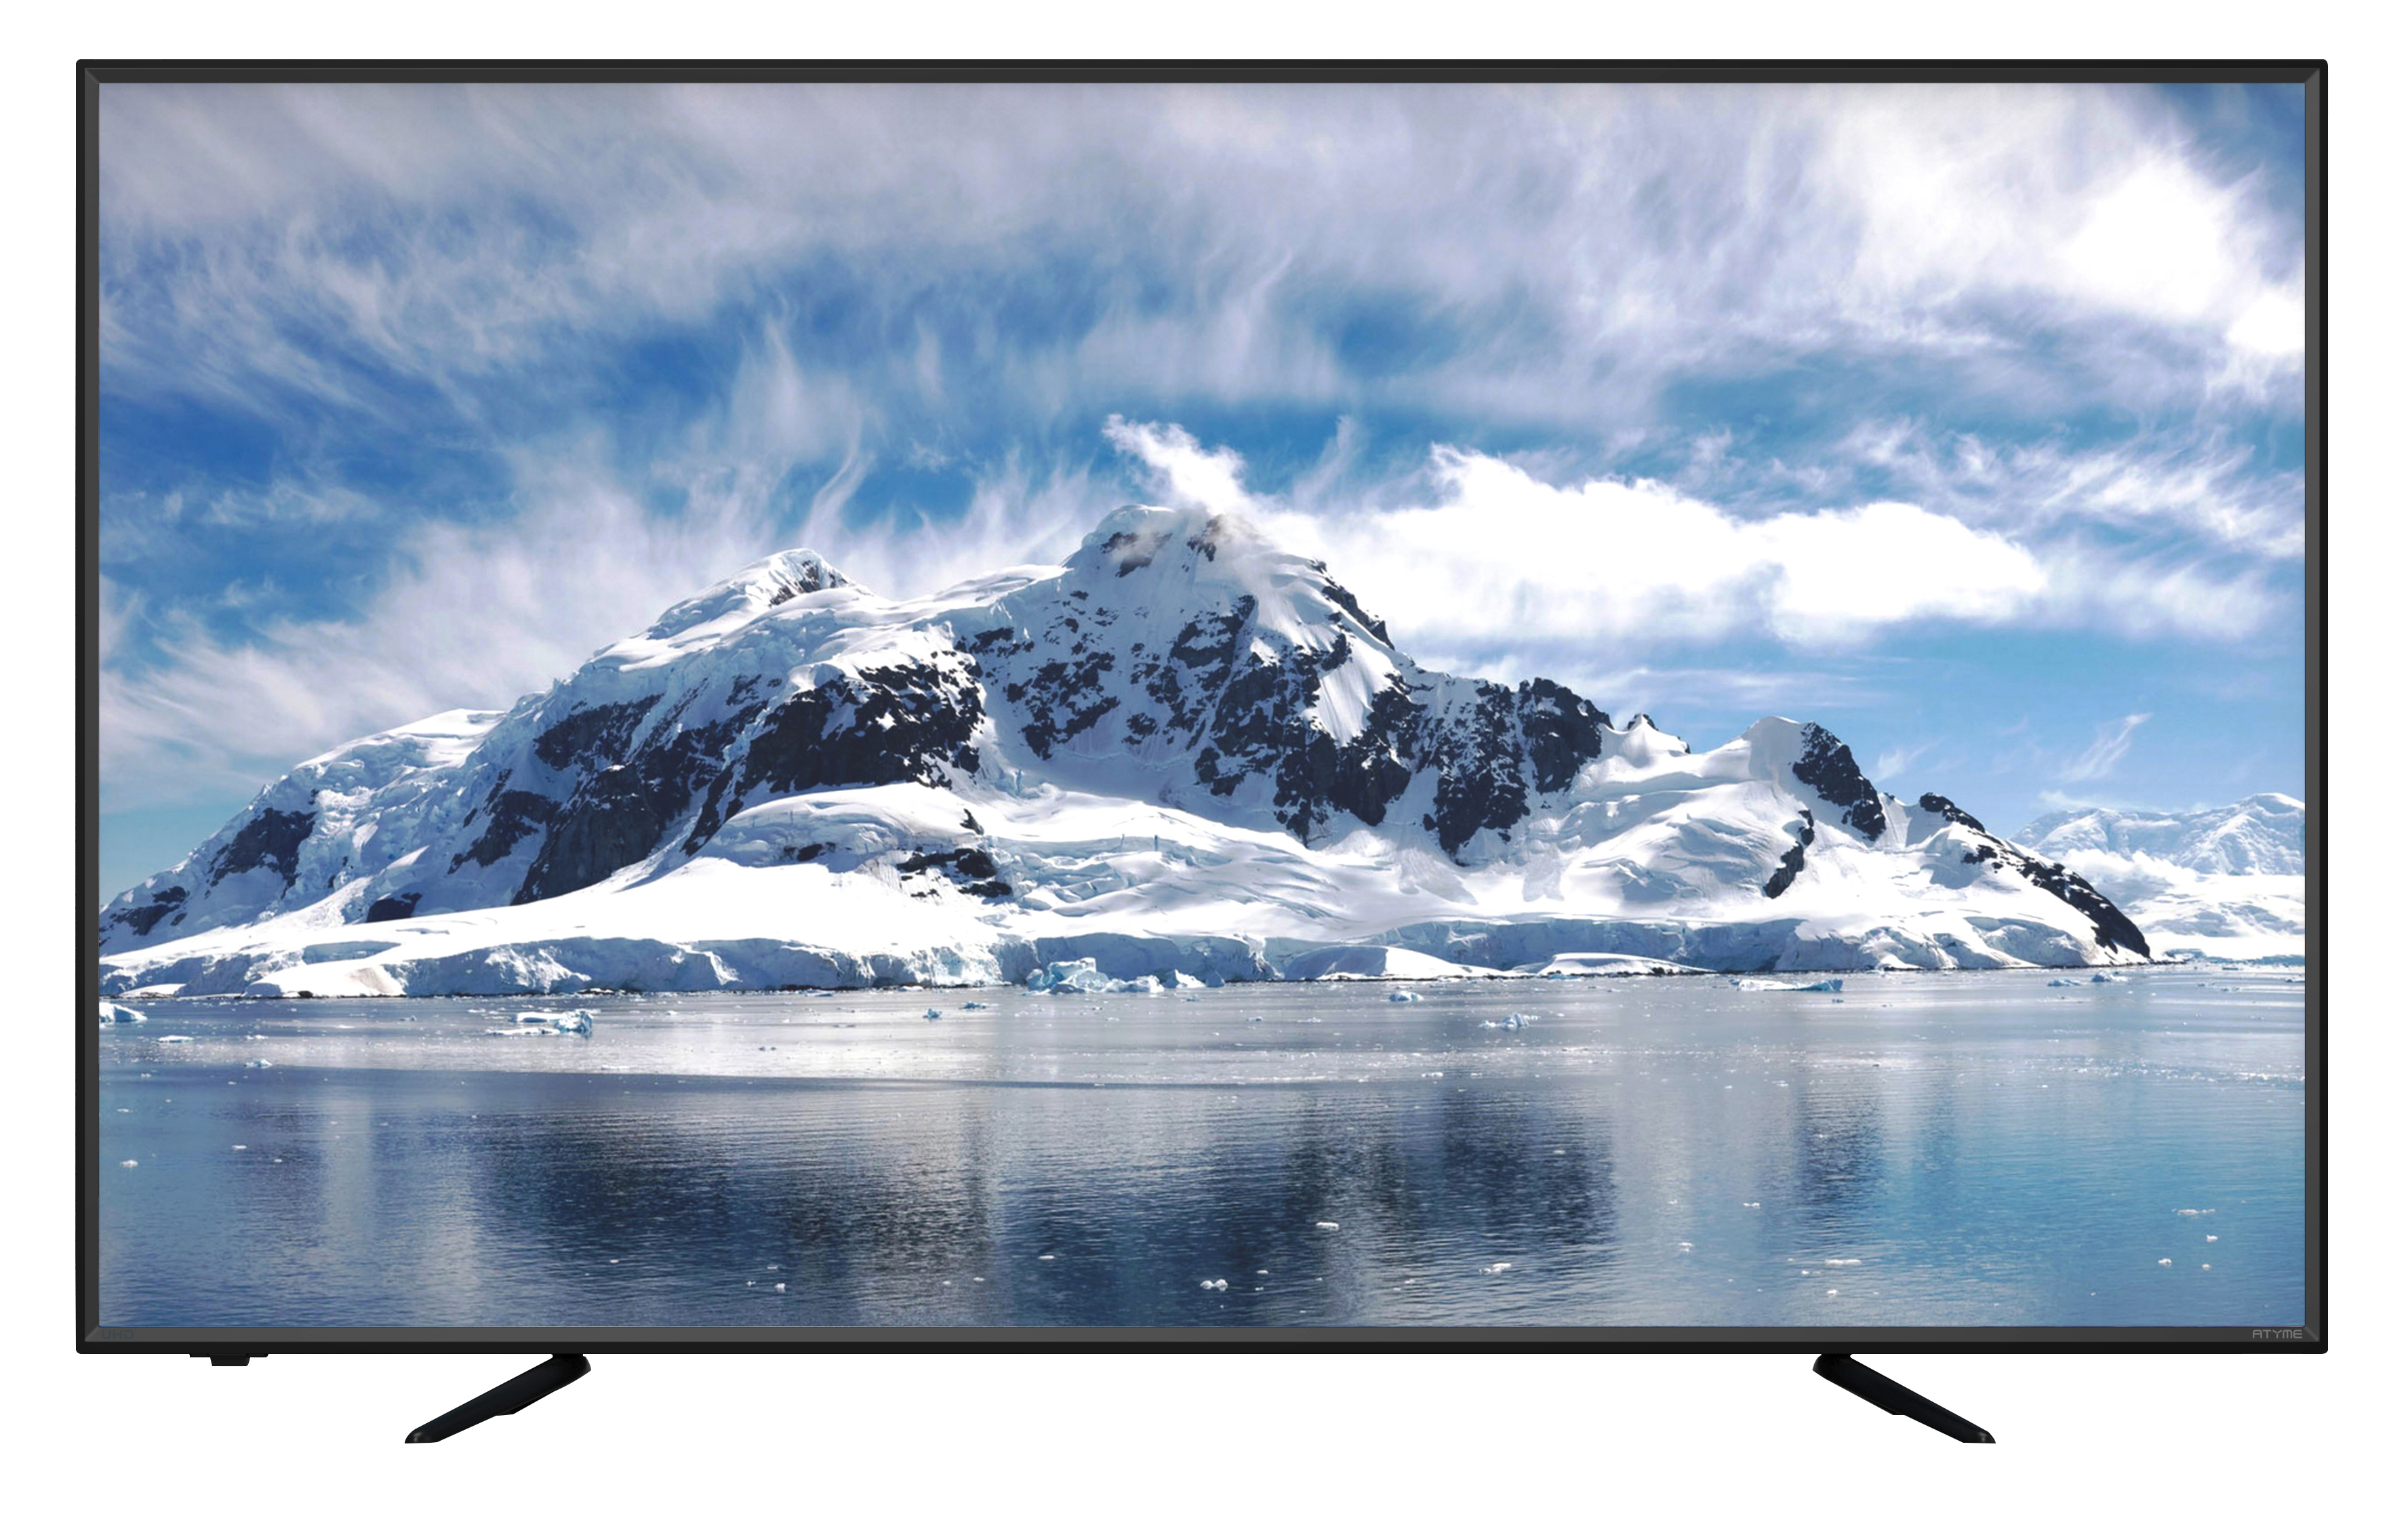 ATYME 65" Class 4K (2160P) LED TV (650AM7UD) - image 1 of 18